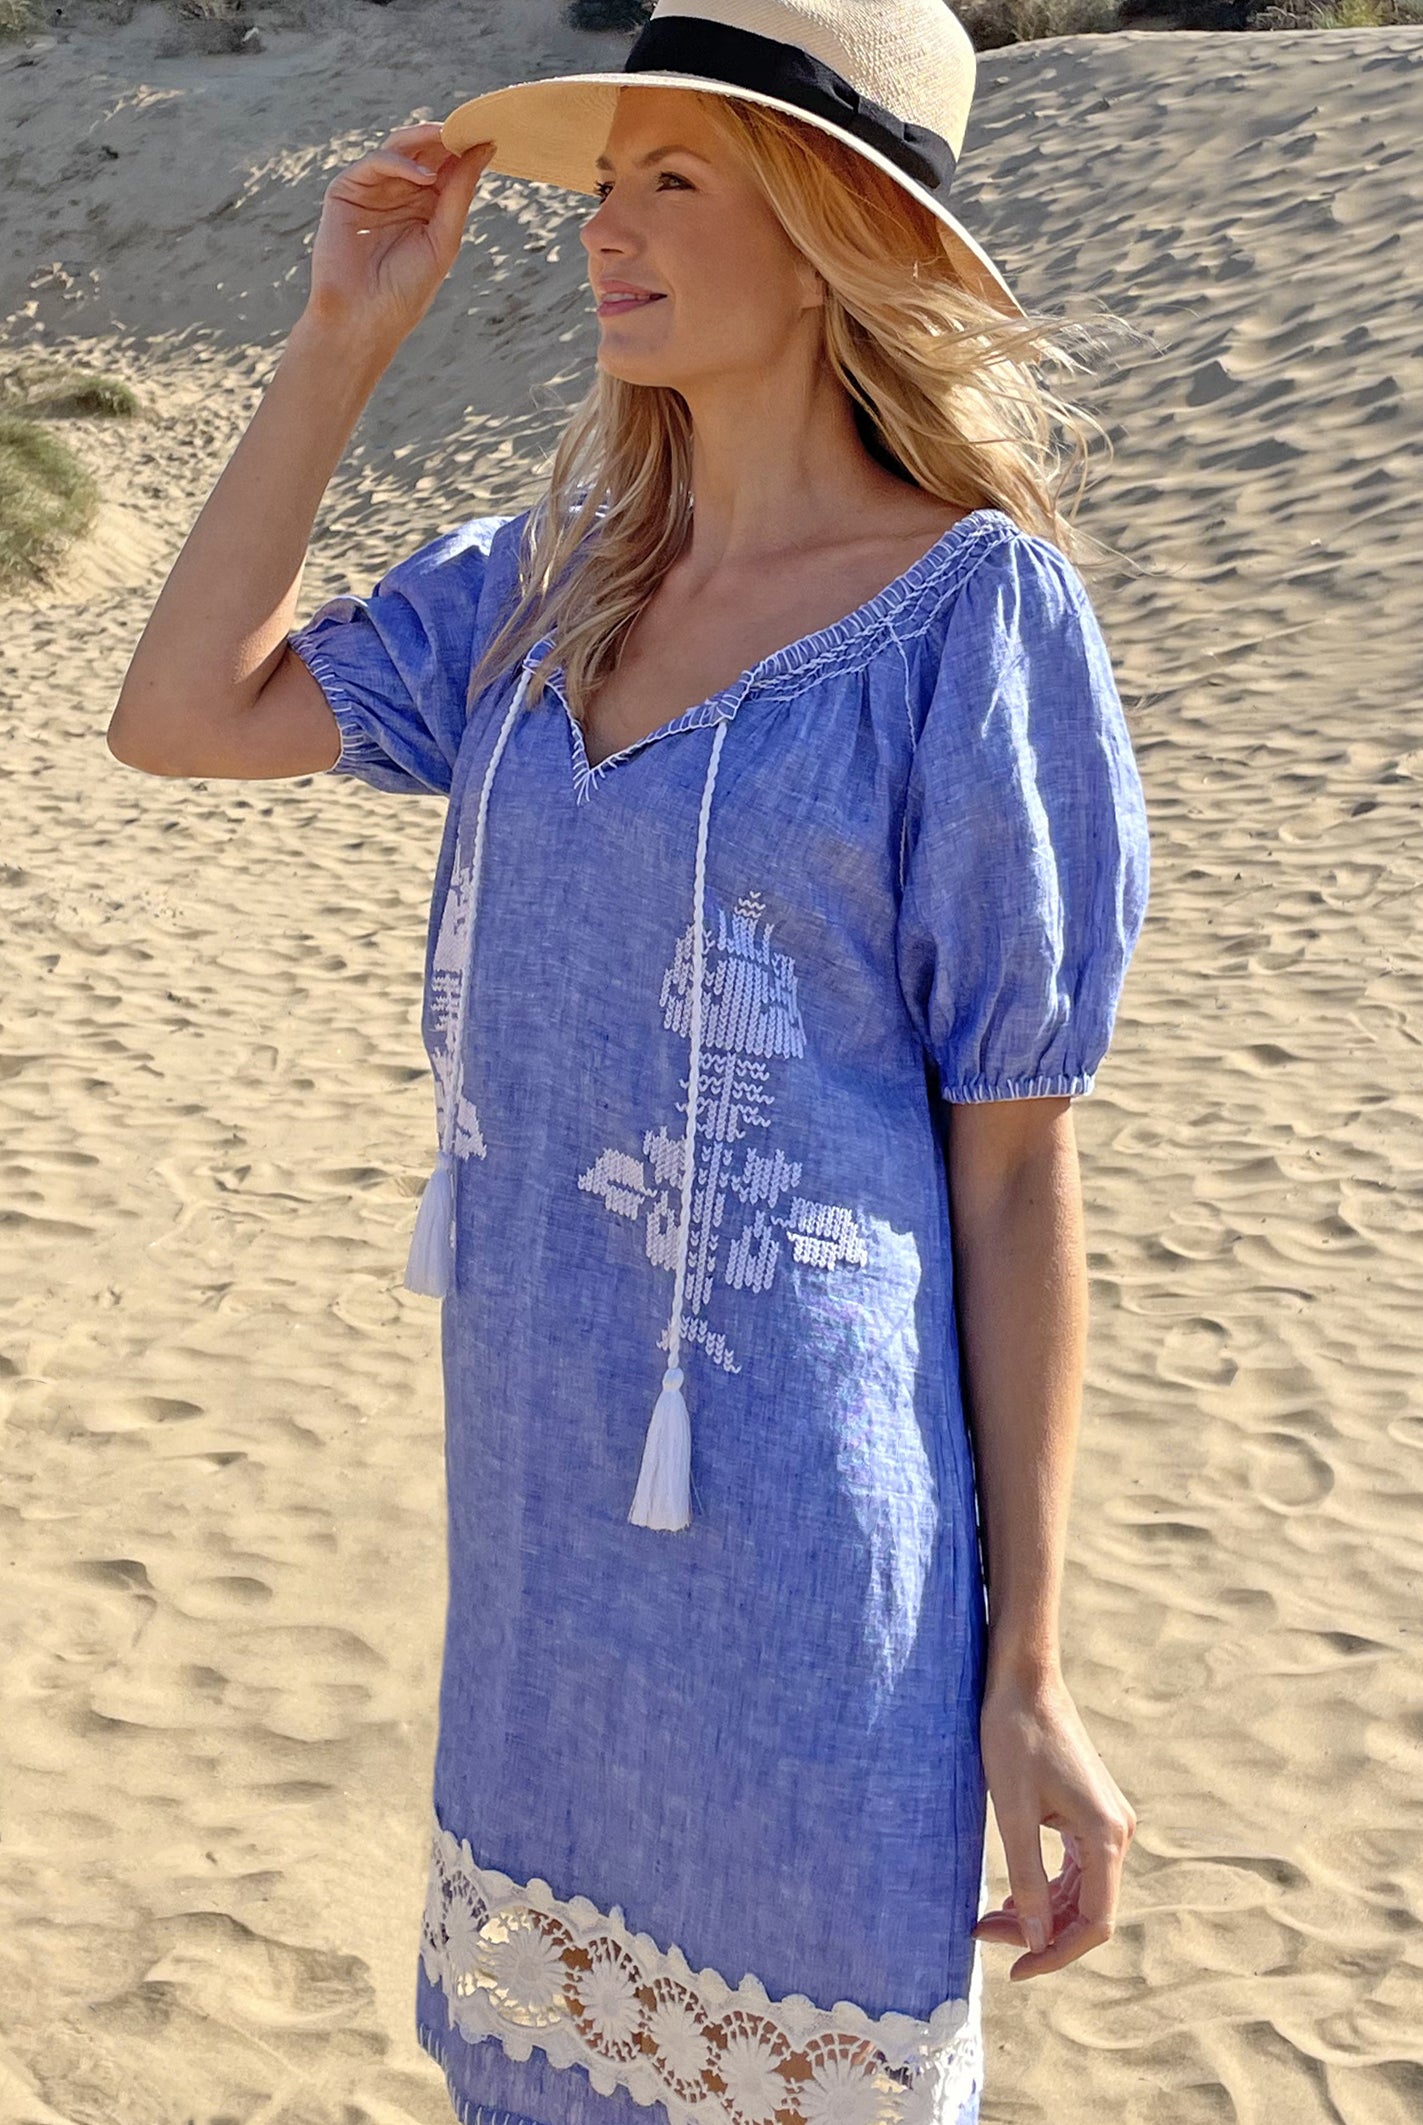 A model on a beach wearing the Rose and Rose Siracusa embroidered blue linen dress and an Anthony Peto Panama hat.